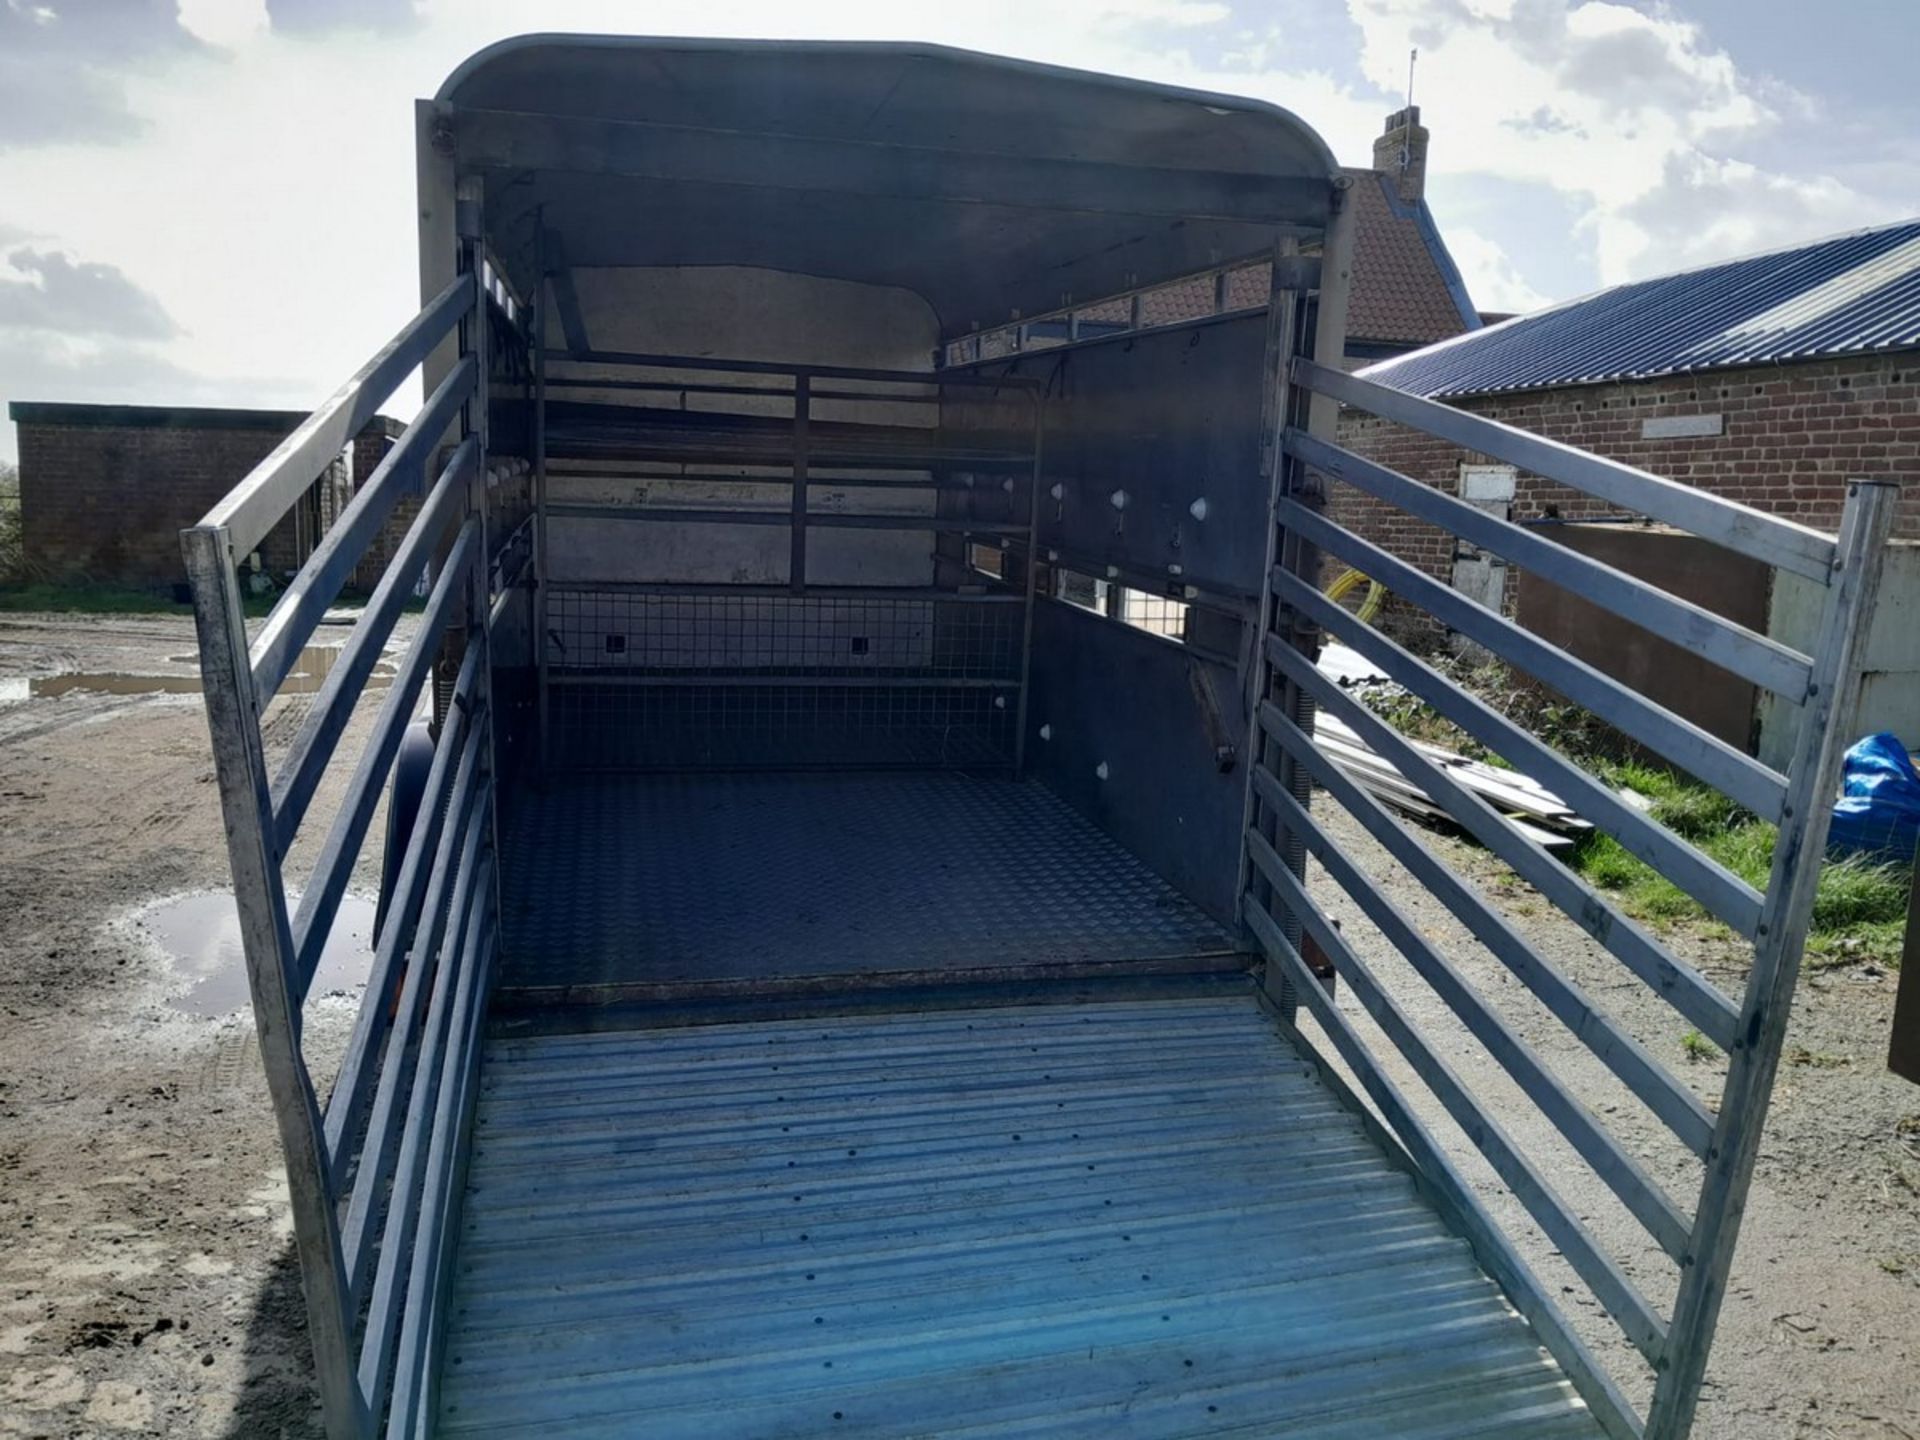 Ifor Williams 12' twin axle livestock trailer with internal cattle gate. Fitted for decks, with ramp - Image 7 of 9